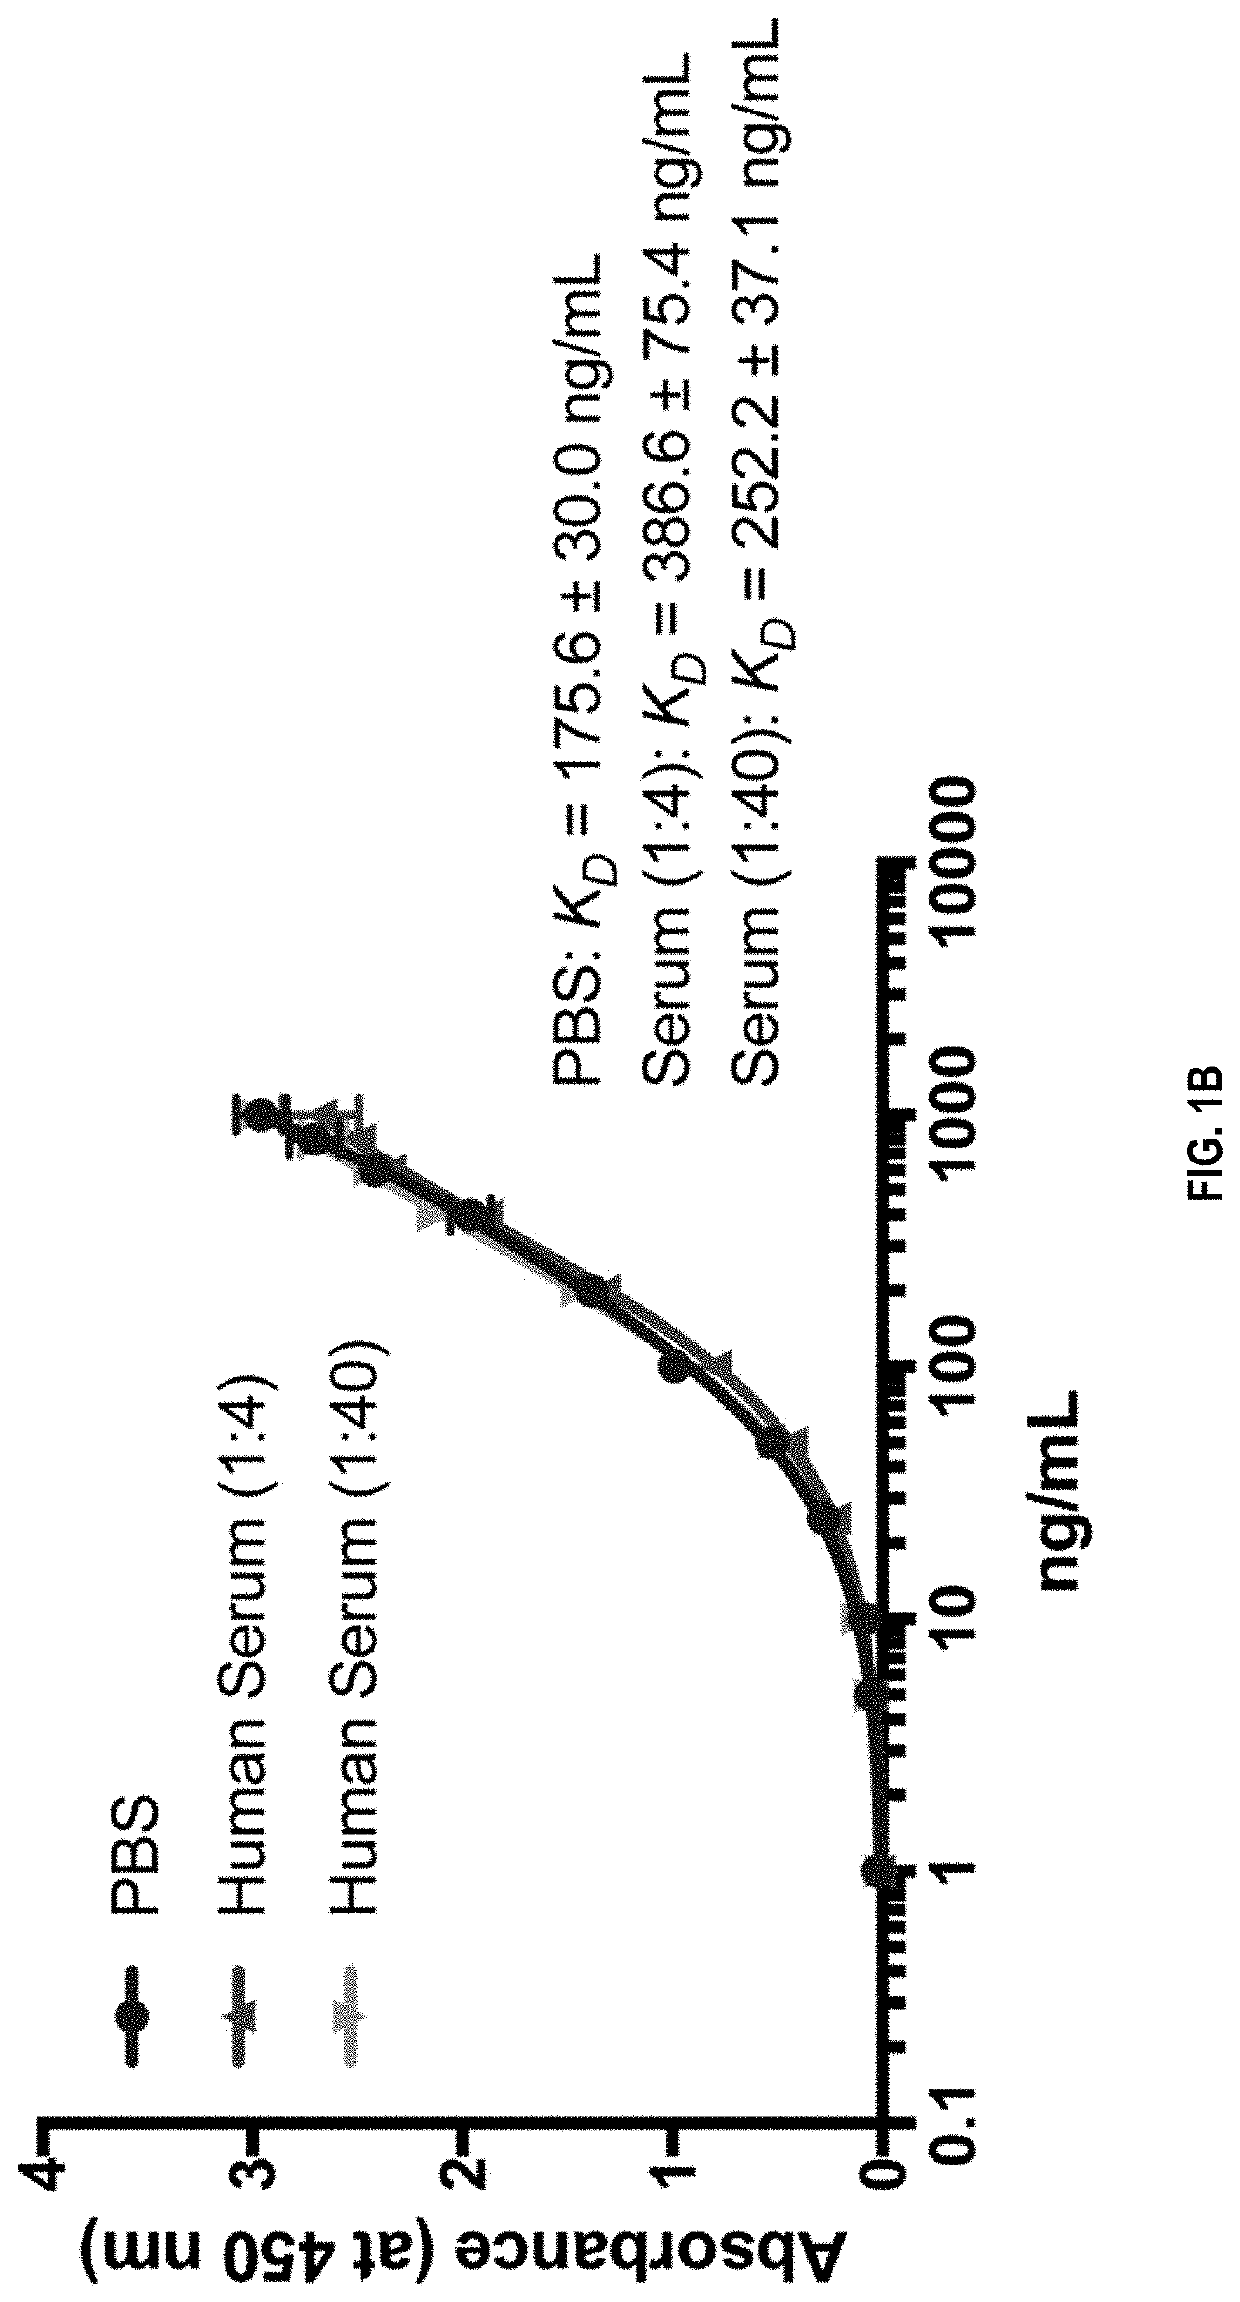 Compositions and methods for treatment of diseases involving cxcl1 function